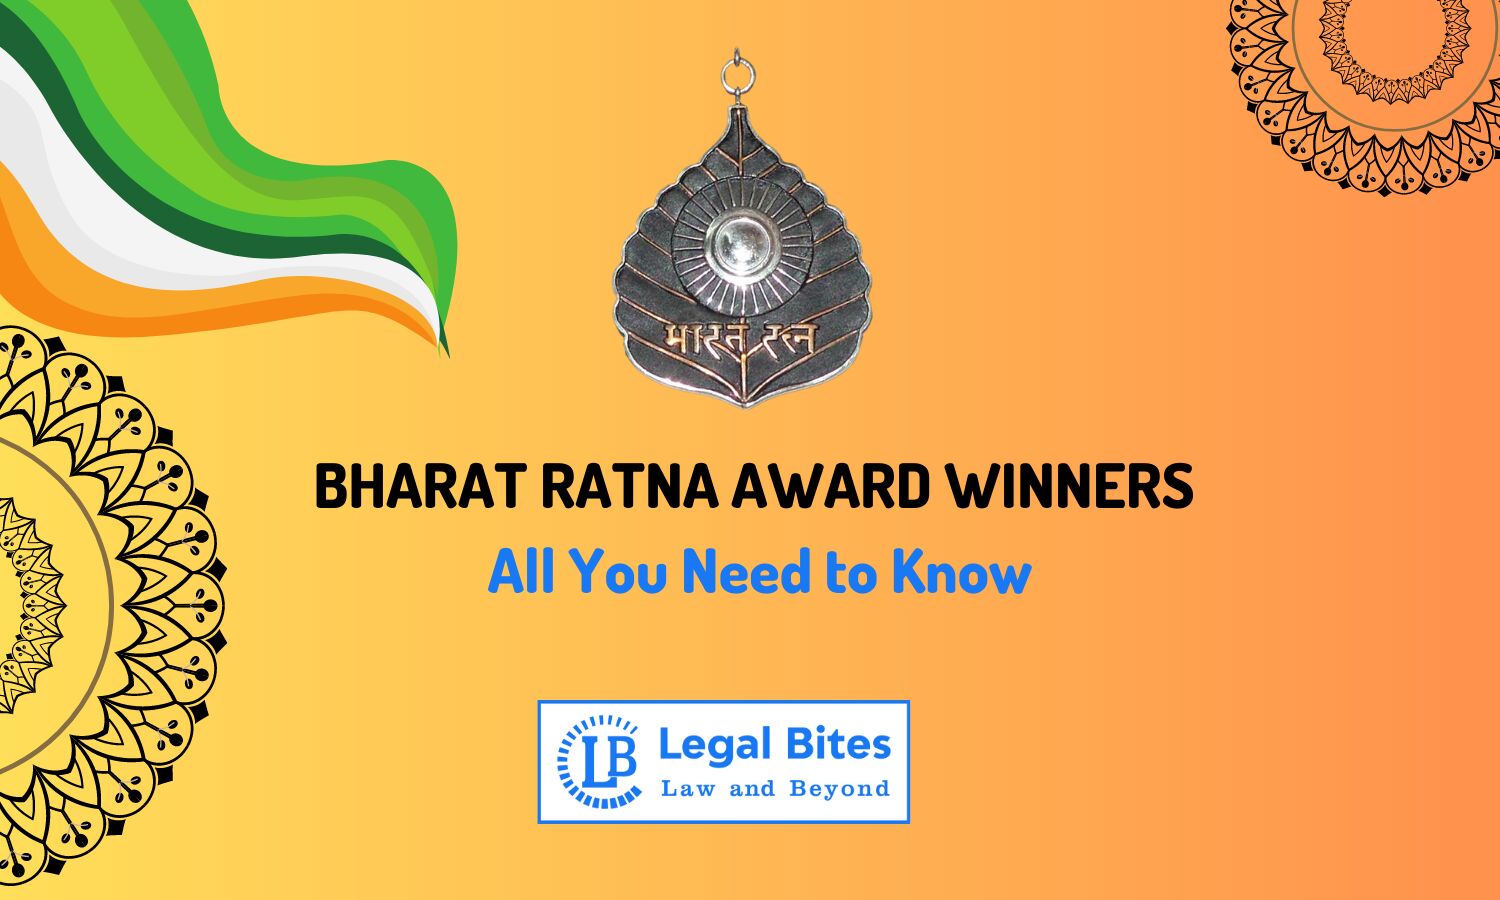 Bharat Ratna Award Winners All You Need to Know